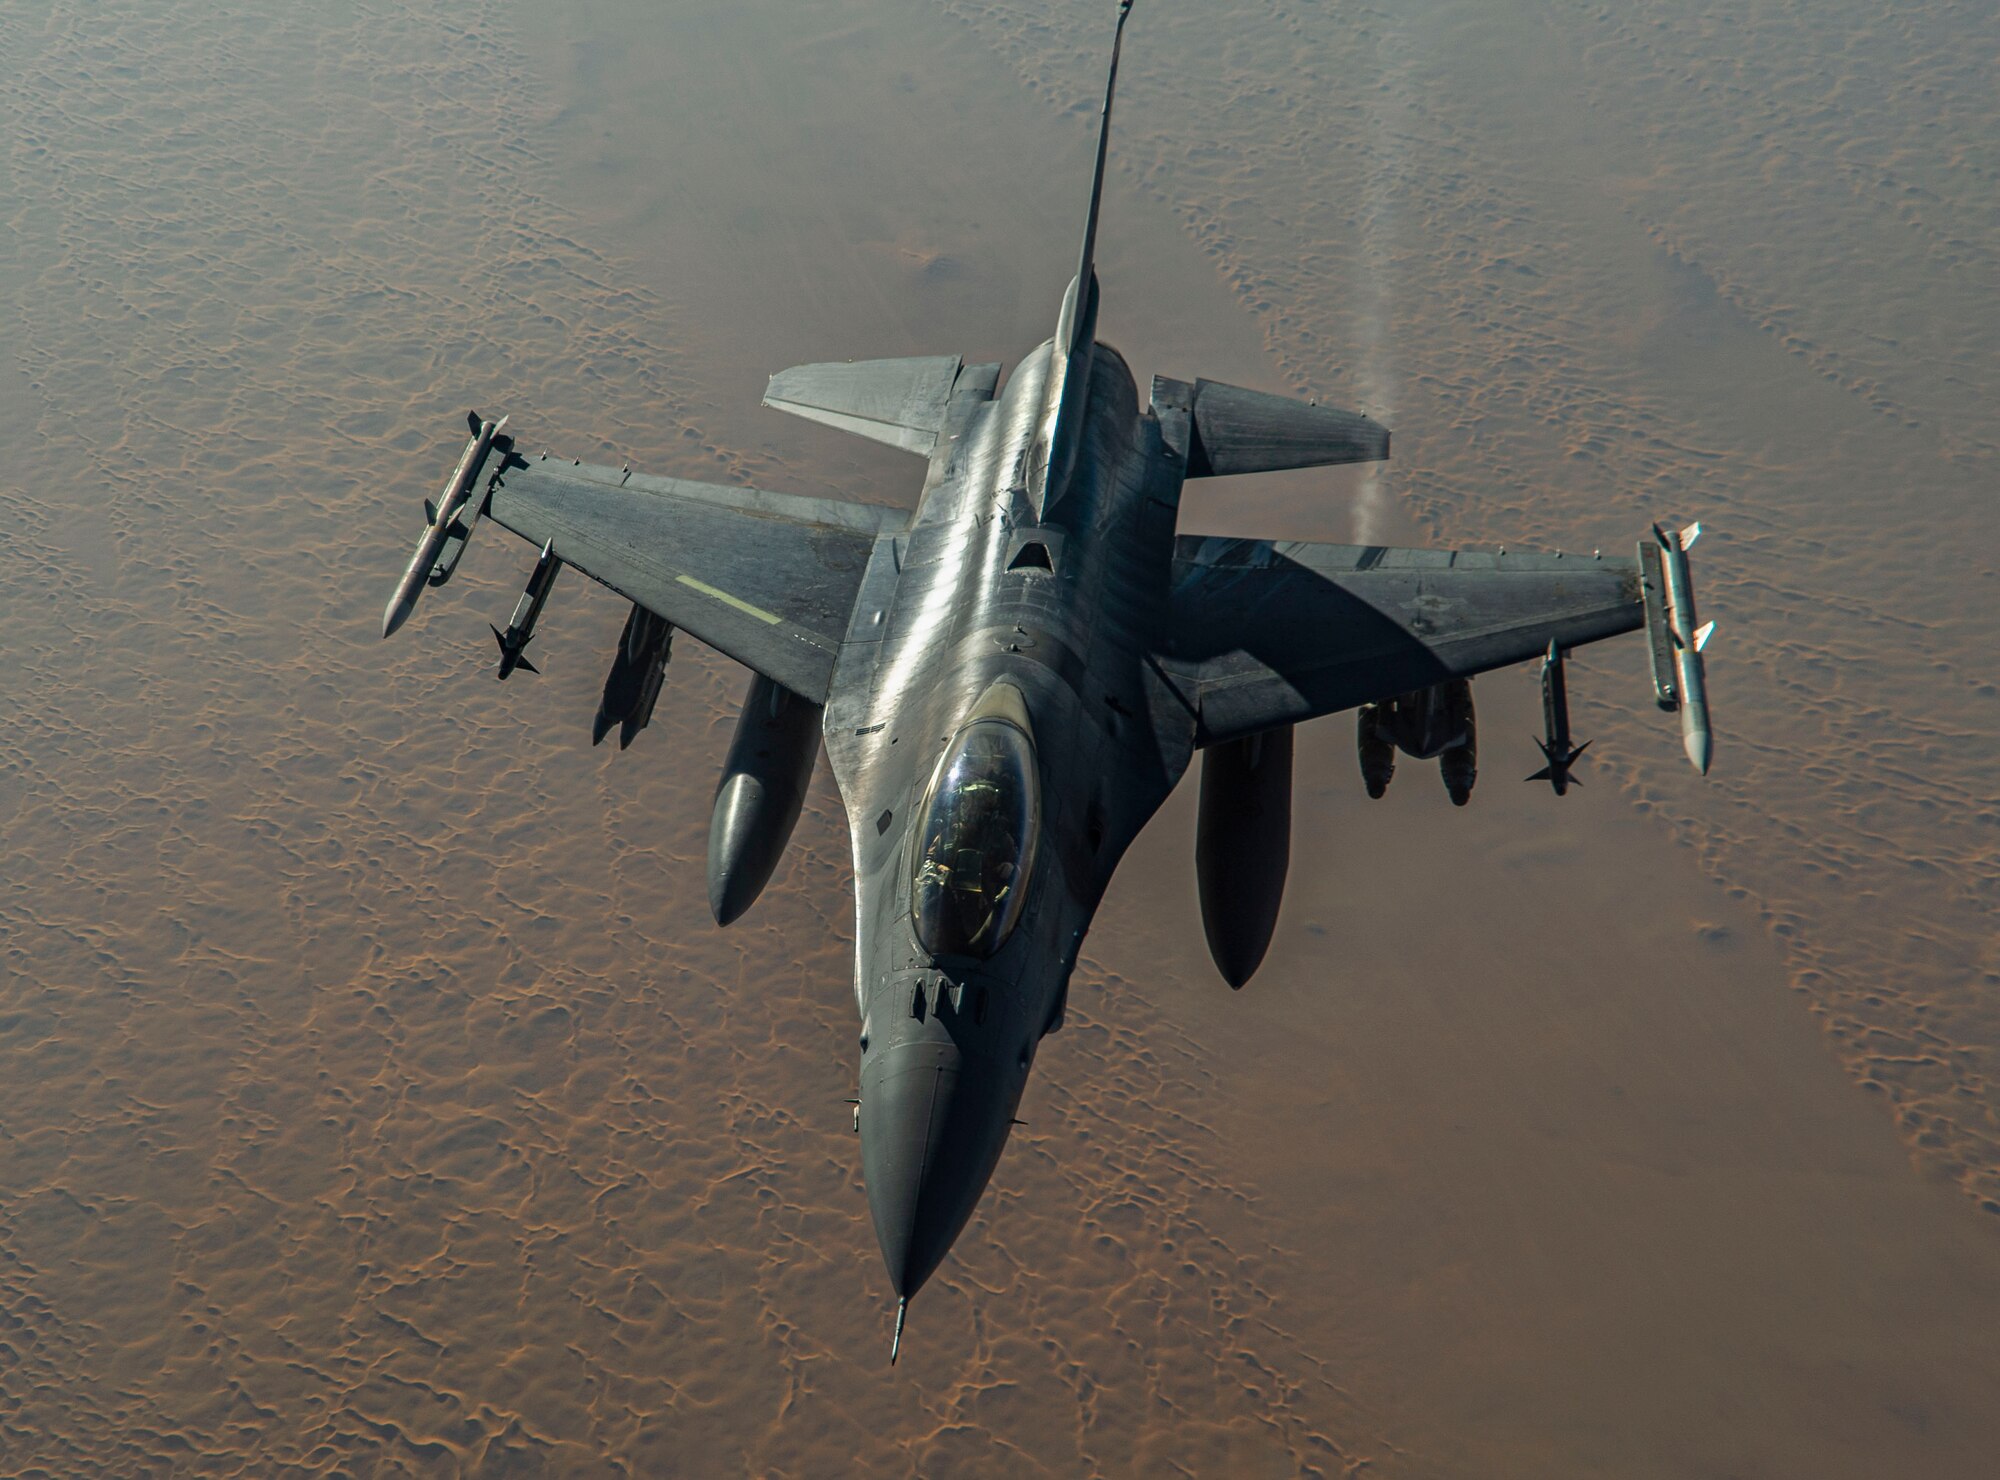 A U.S. Air Force F-16 Fighting Falcon pilot prepares to depart after receiving fuel from a KC-135 Stratotanker, assigned to the 340th Expeditionary Aircraft Refueling Squadron, while flying routine operations over Southwest Asia Feb. 16th, 2021.